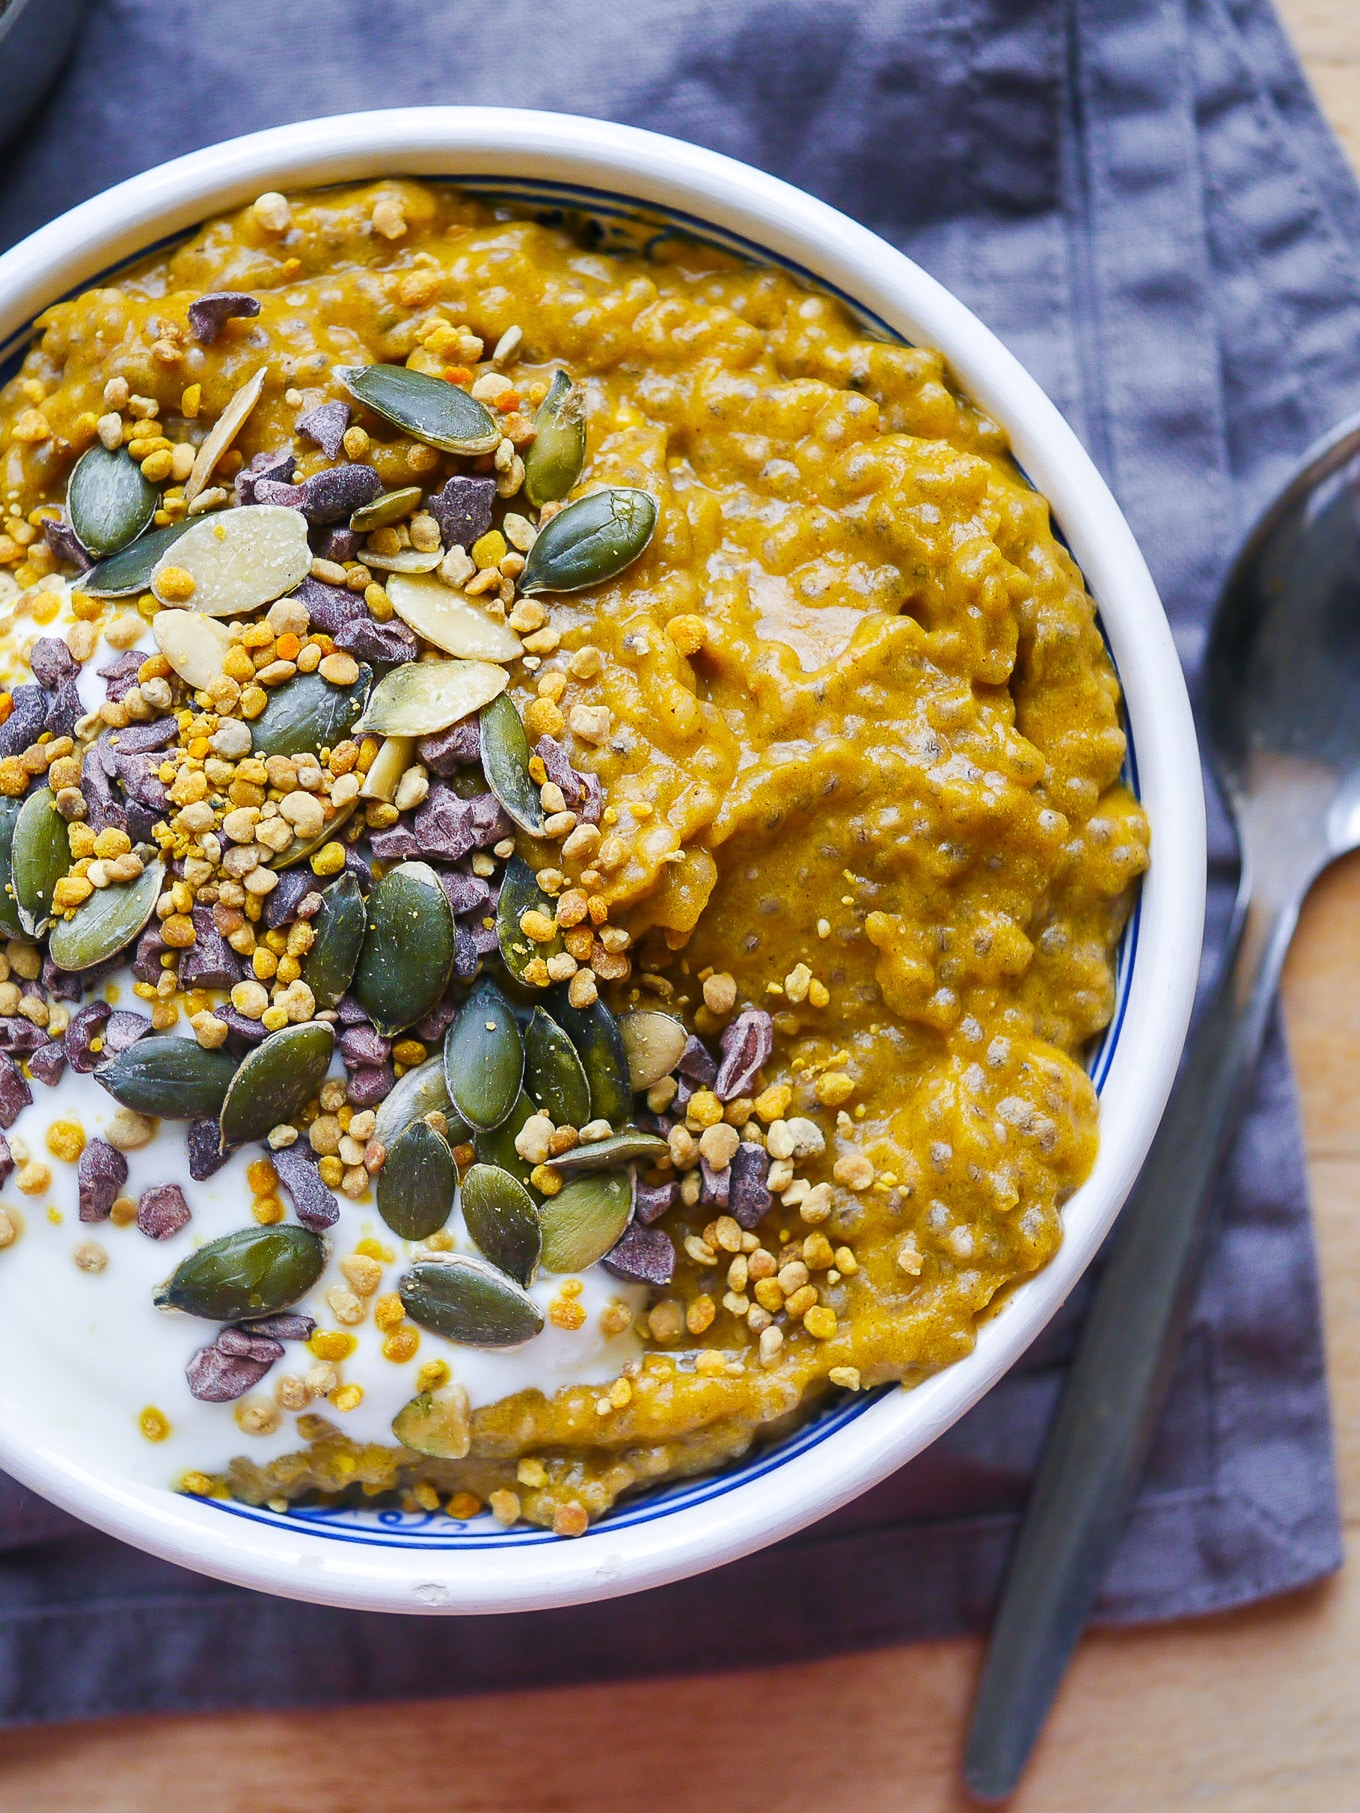 Pumpkin Spice Chia Pudding made with real pumpkin puree and coconut milk - a gluten free, dairy free and vegan / paleo friendly treat that works for a healthy breakfast, snack or dessert! #pumpkinspice #chiapudding #glutenfree #vegan